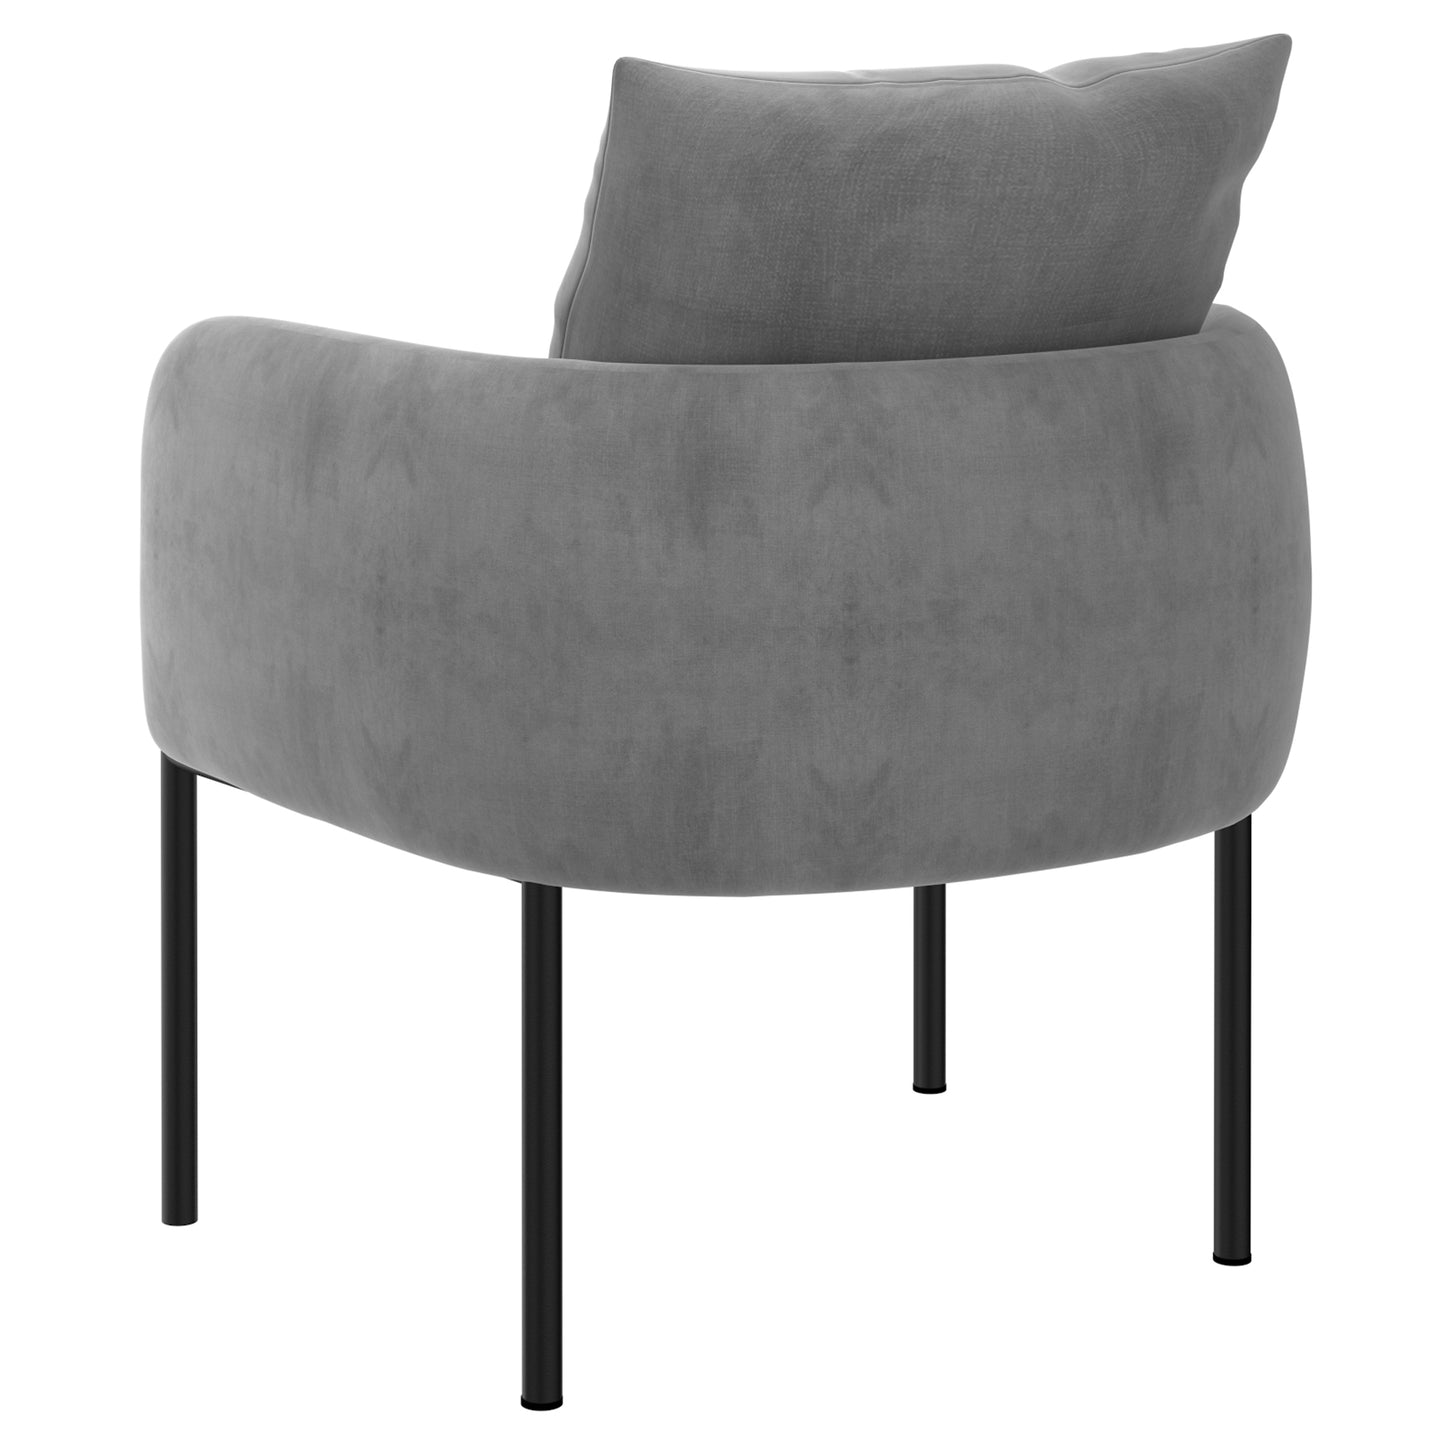 (PETRIE GREY) - FABRIC ACCENT CHAIR